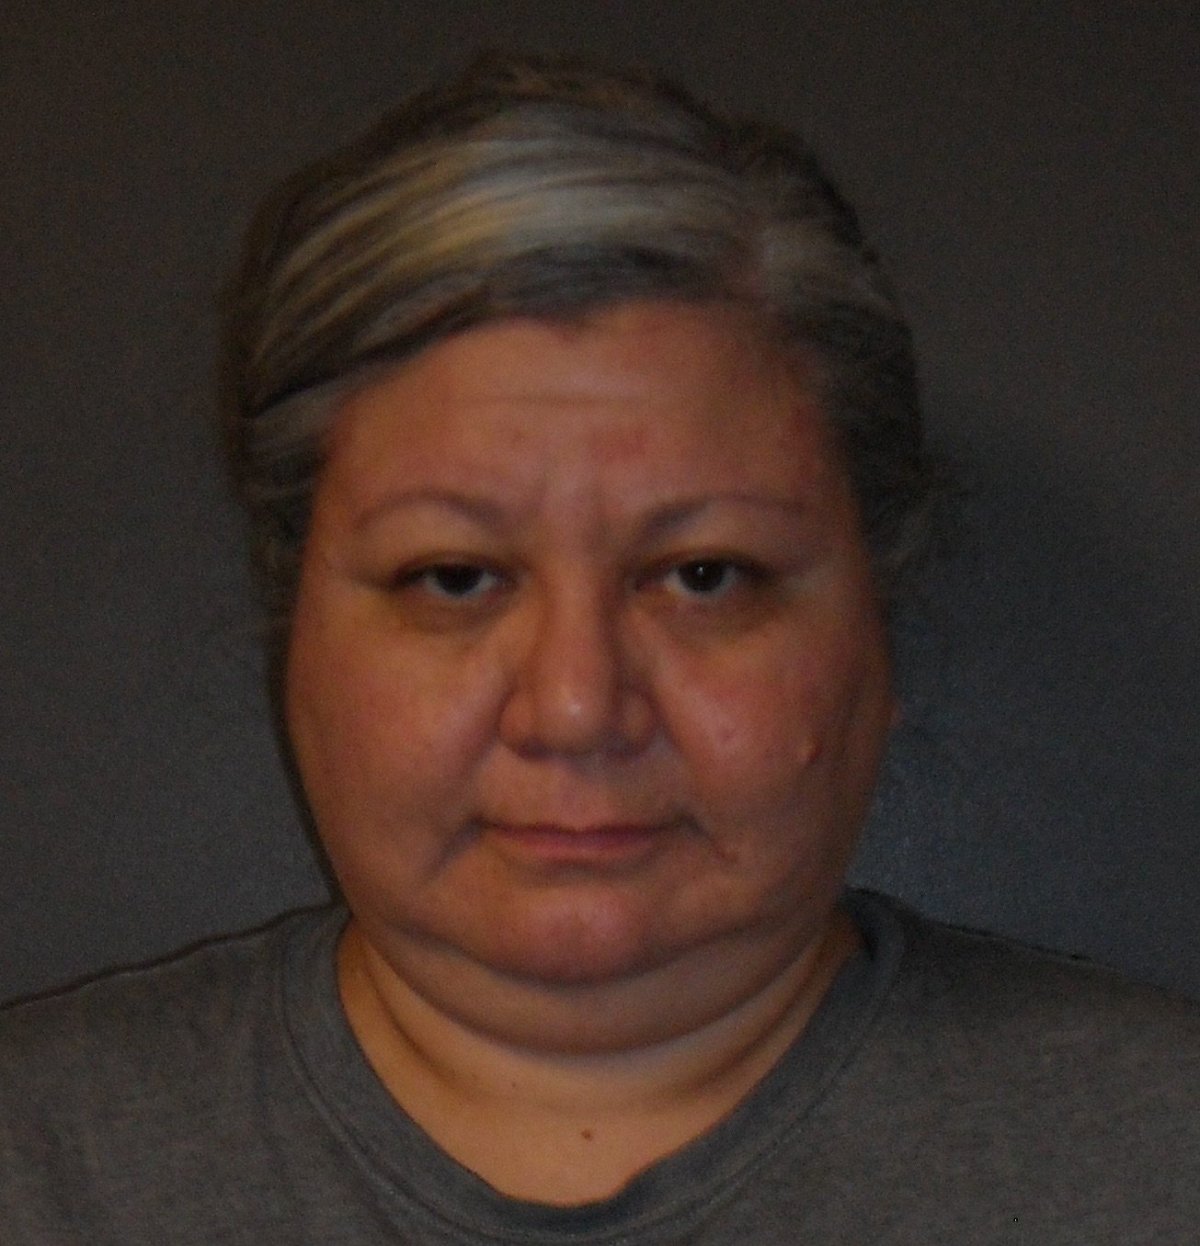 Michelle Babette Lawrence, 48, is described as an aboriginal female, approximately 5’8” tall and around 200 lbs. She has brown hair and brown eyes, with descriptive features such as a mole on her left eyelid and left cheek.